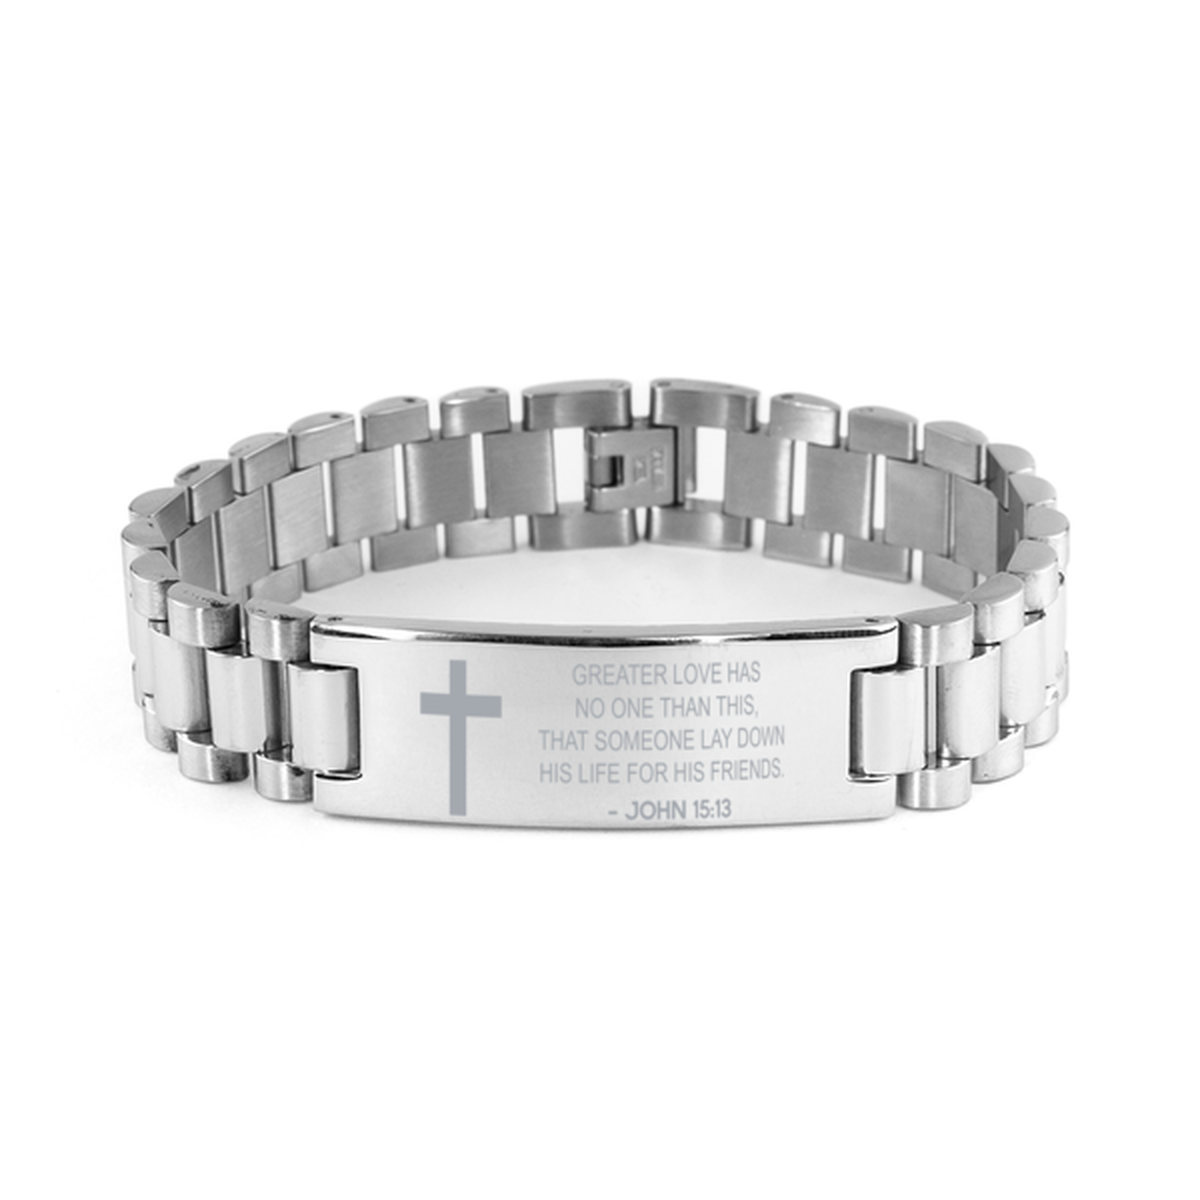 Christian Ladder Stainless Steel Bracelet, John 15:13 Greater Love Has No One Than This, That Someone, Motivational Bible Verse Gifts For Men Women